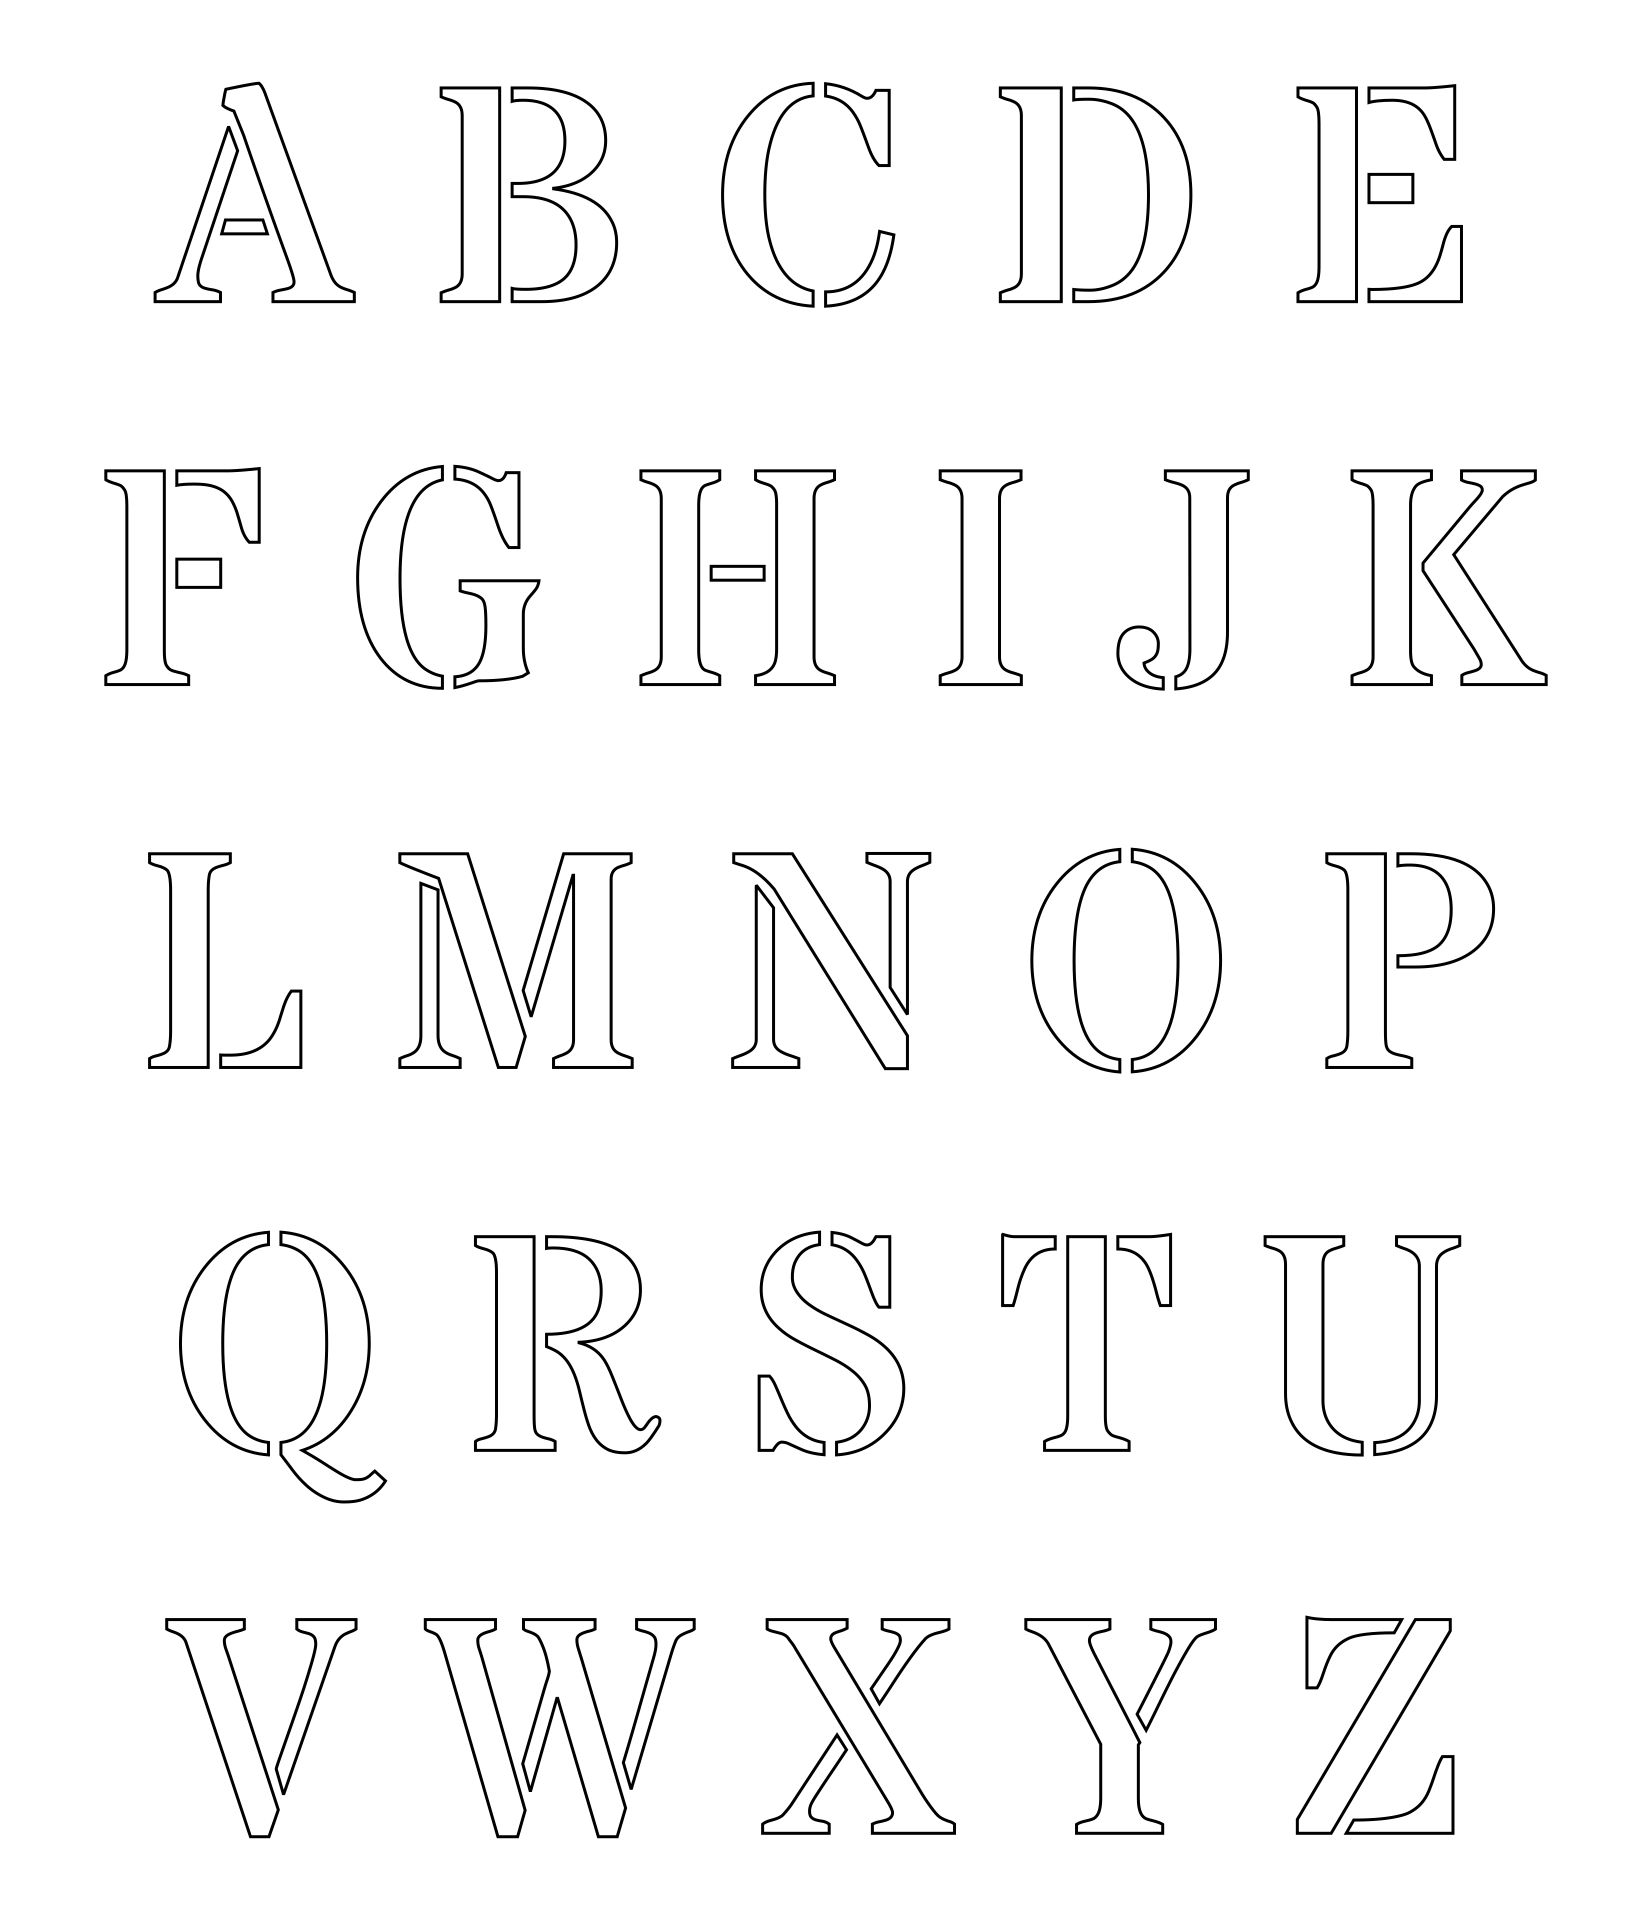 artistik-stencil-alphabet-printable-images-gallery-category-page-3